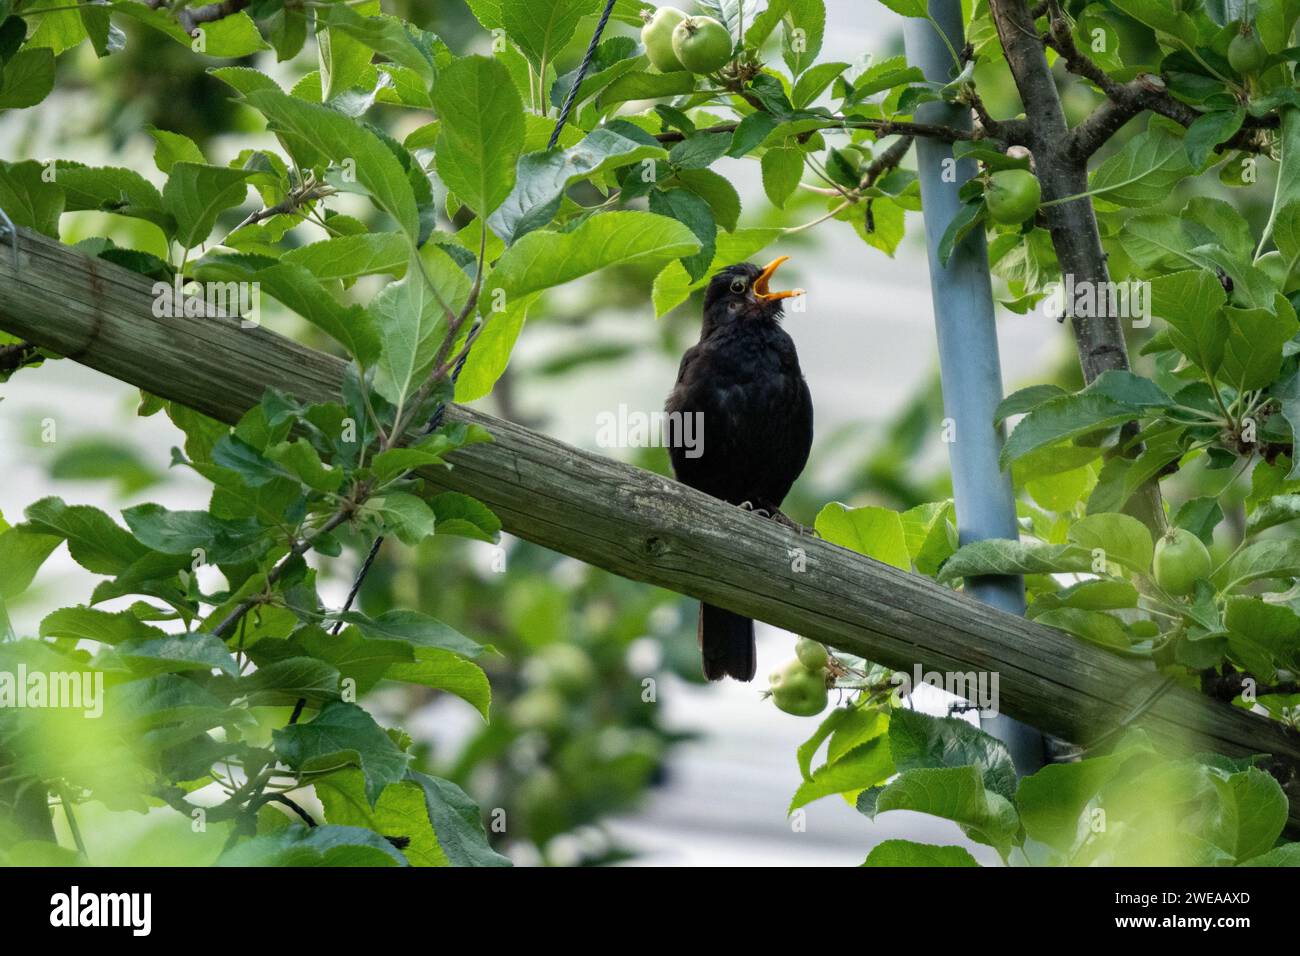 Blackbird sitting in front of trees Stock Photo